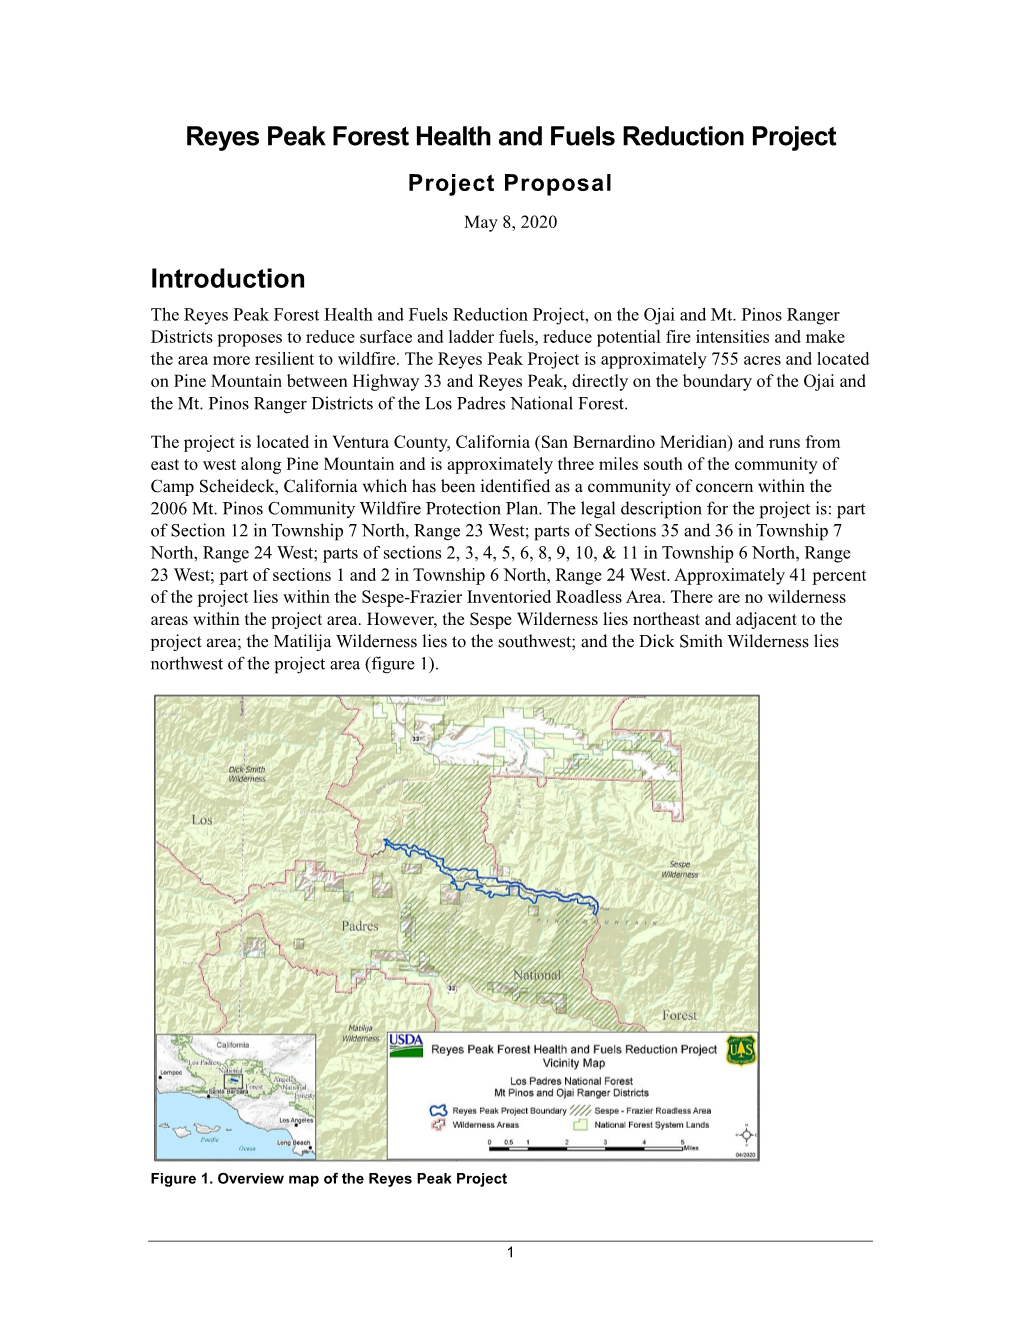 Reyes Peak Forest Health and Fuels Reduction Project Proposal